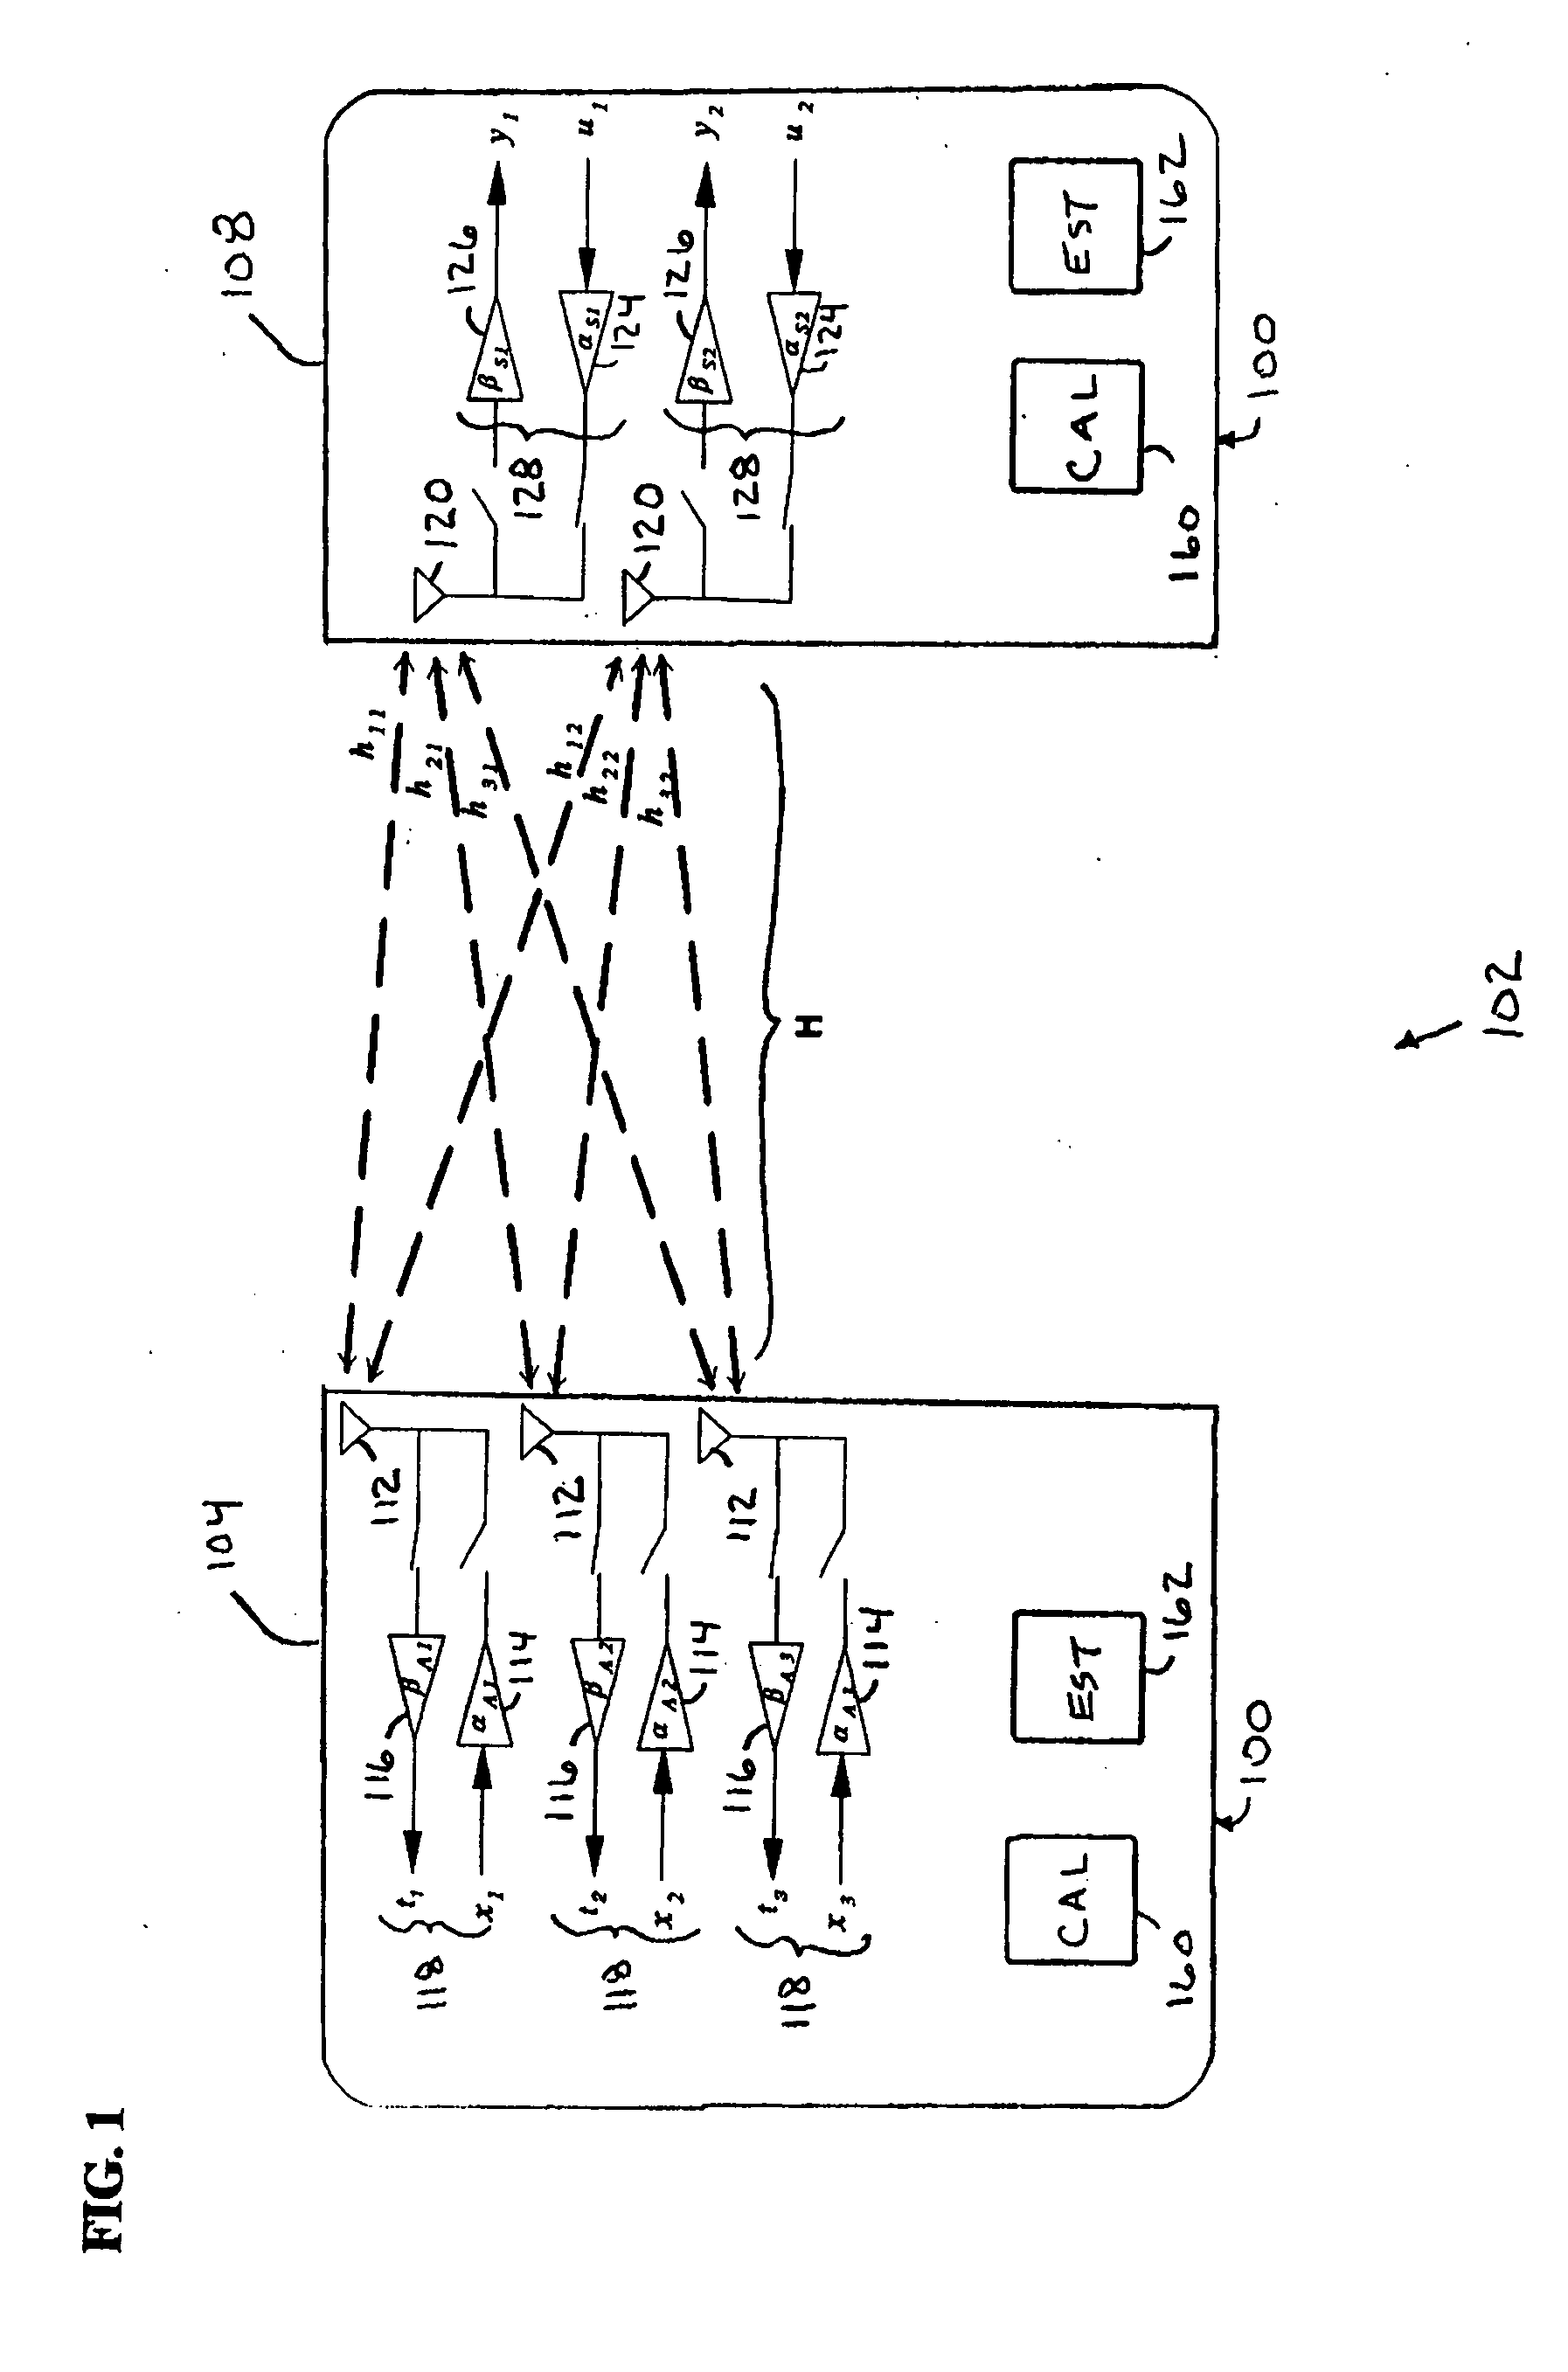 Communication overhead reduction apparatus, systems, and methods